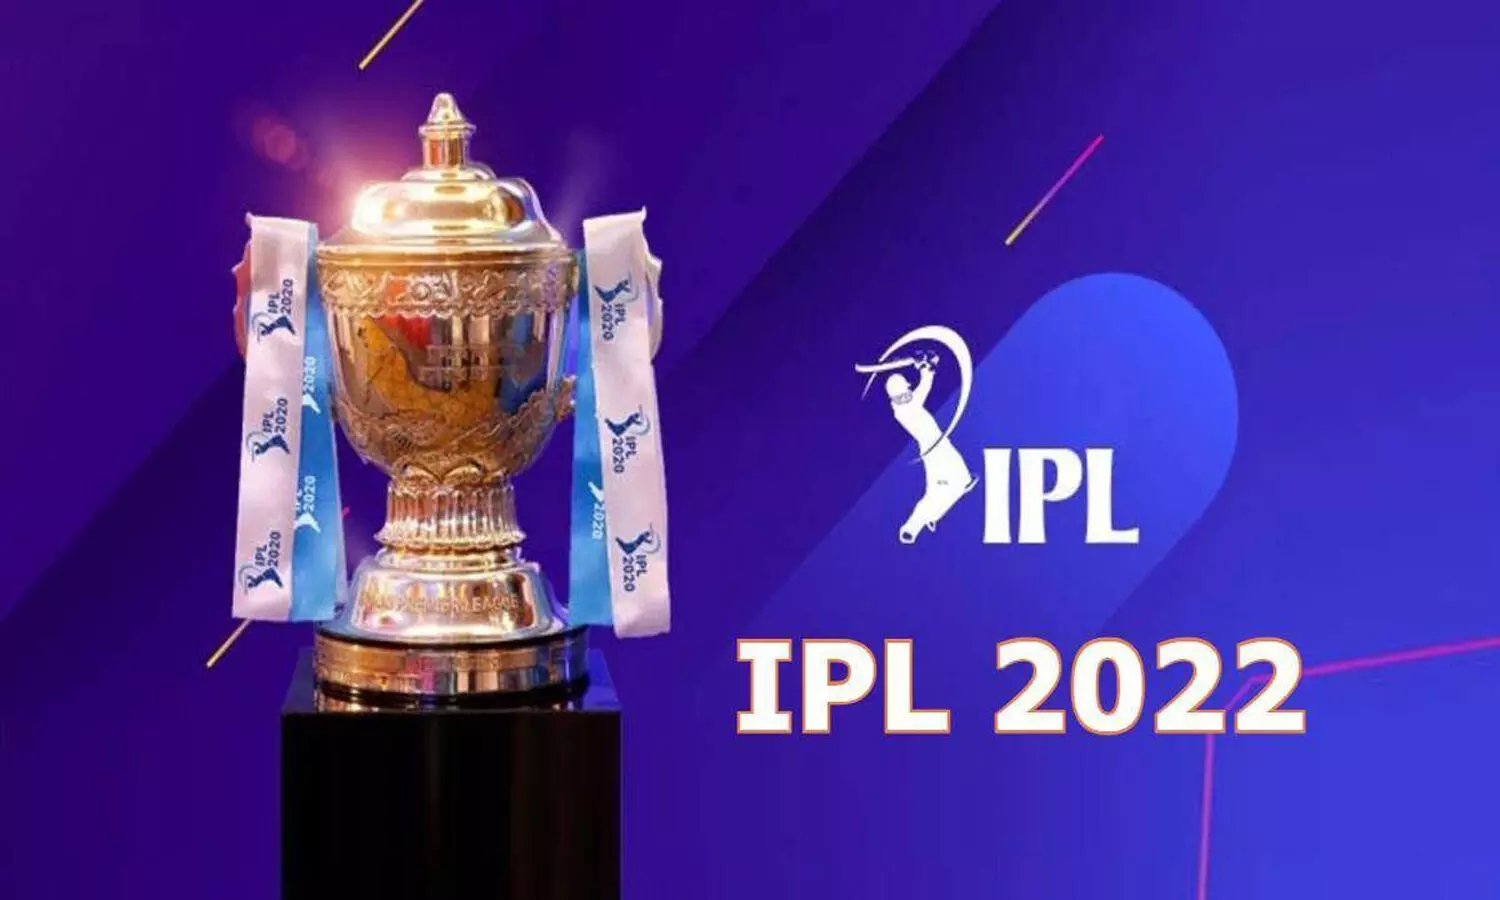 IPL 2022: Maharashtra set to host all league games, playoff in Ahmedabad, says report